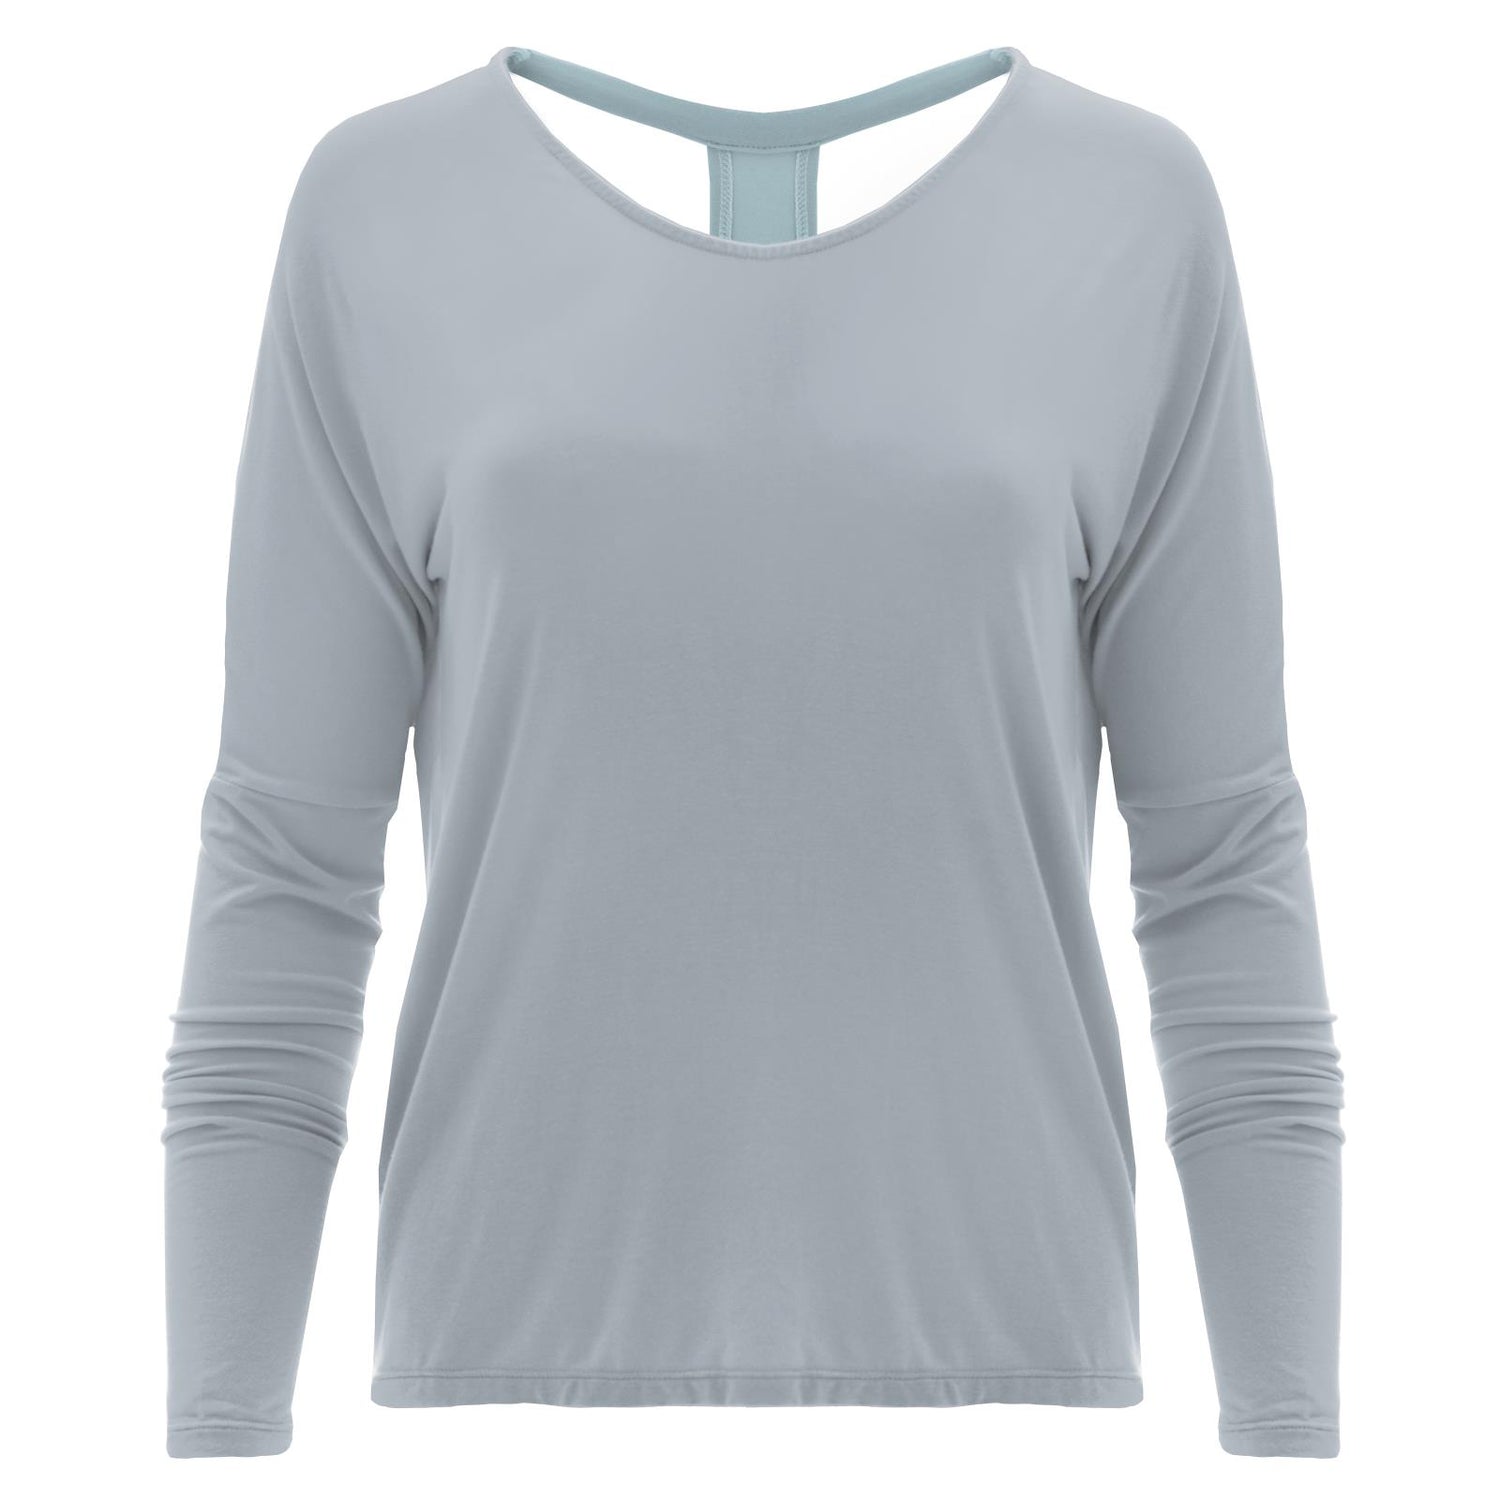 Women's Open Back Top in Pearl Blue with Spring Sky